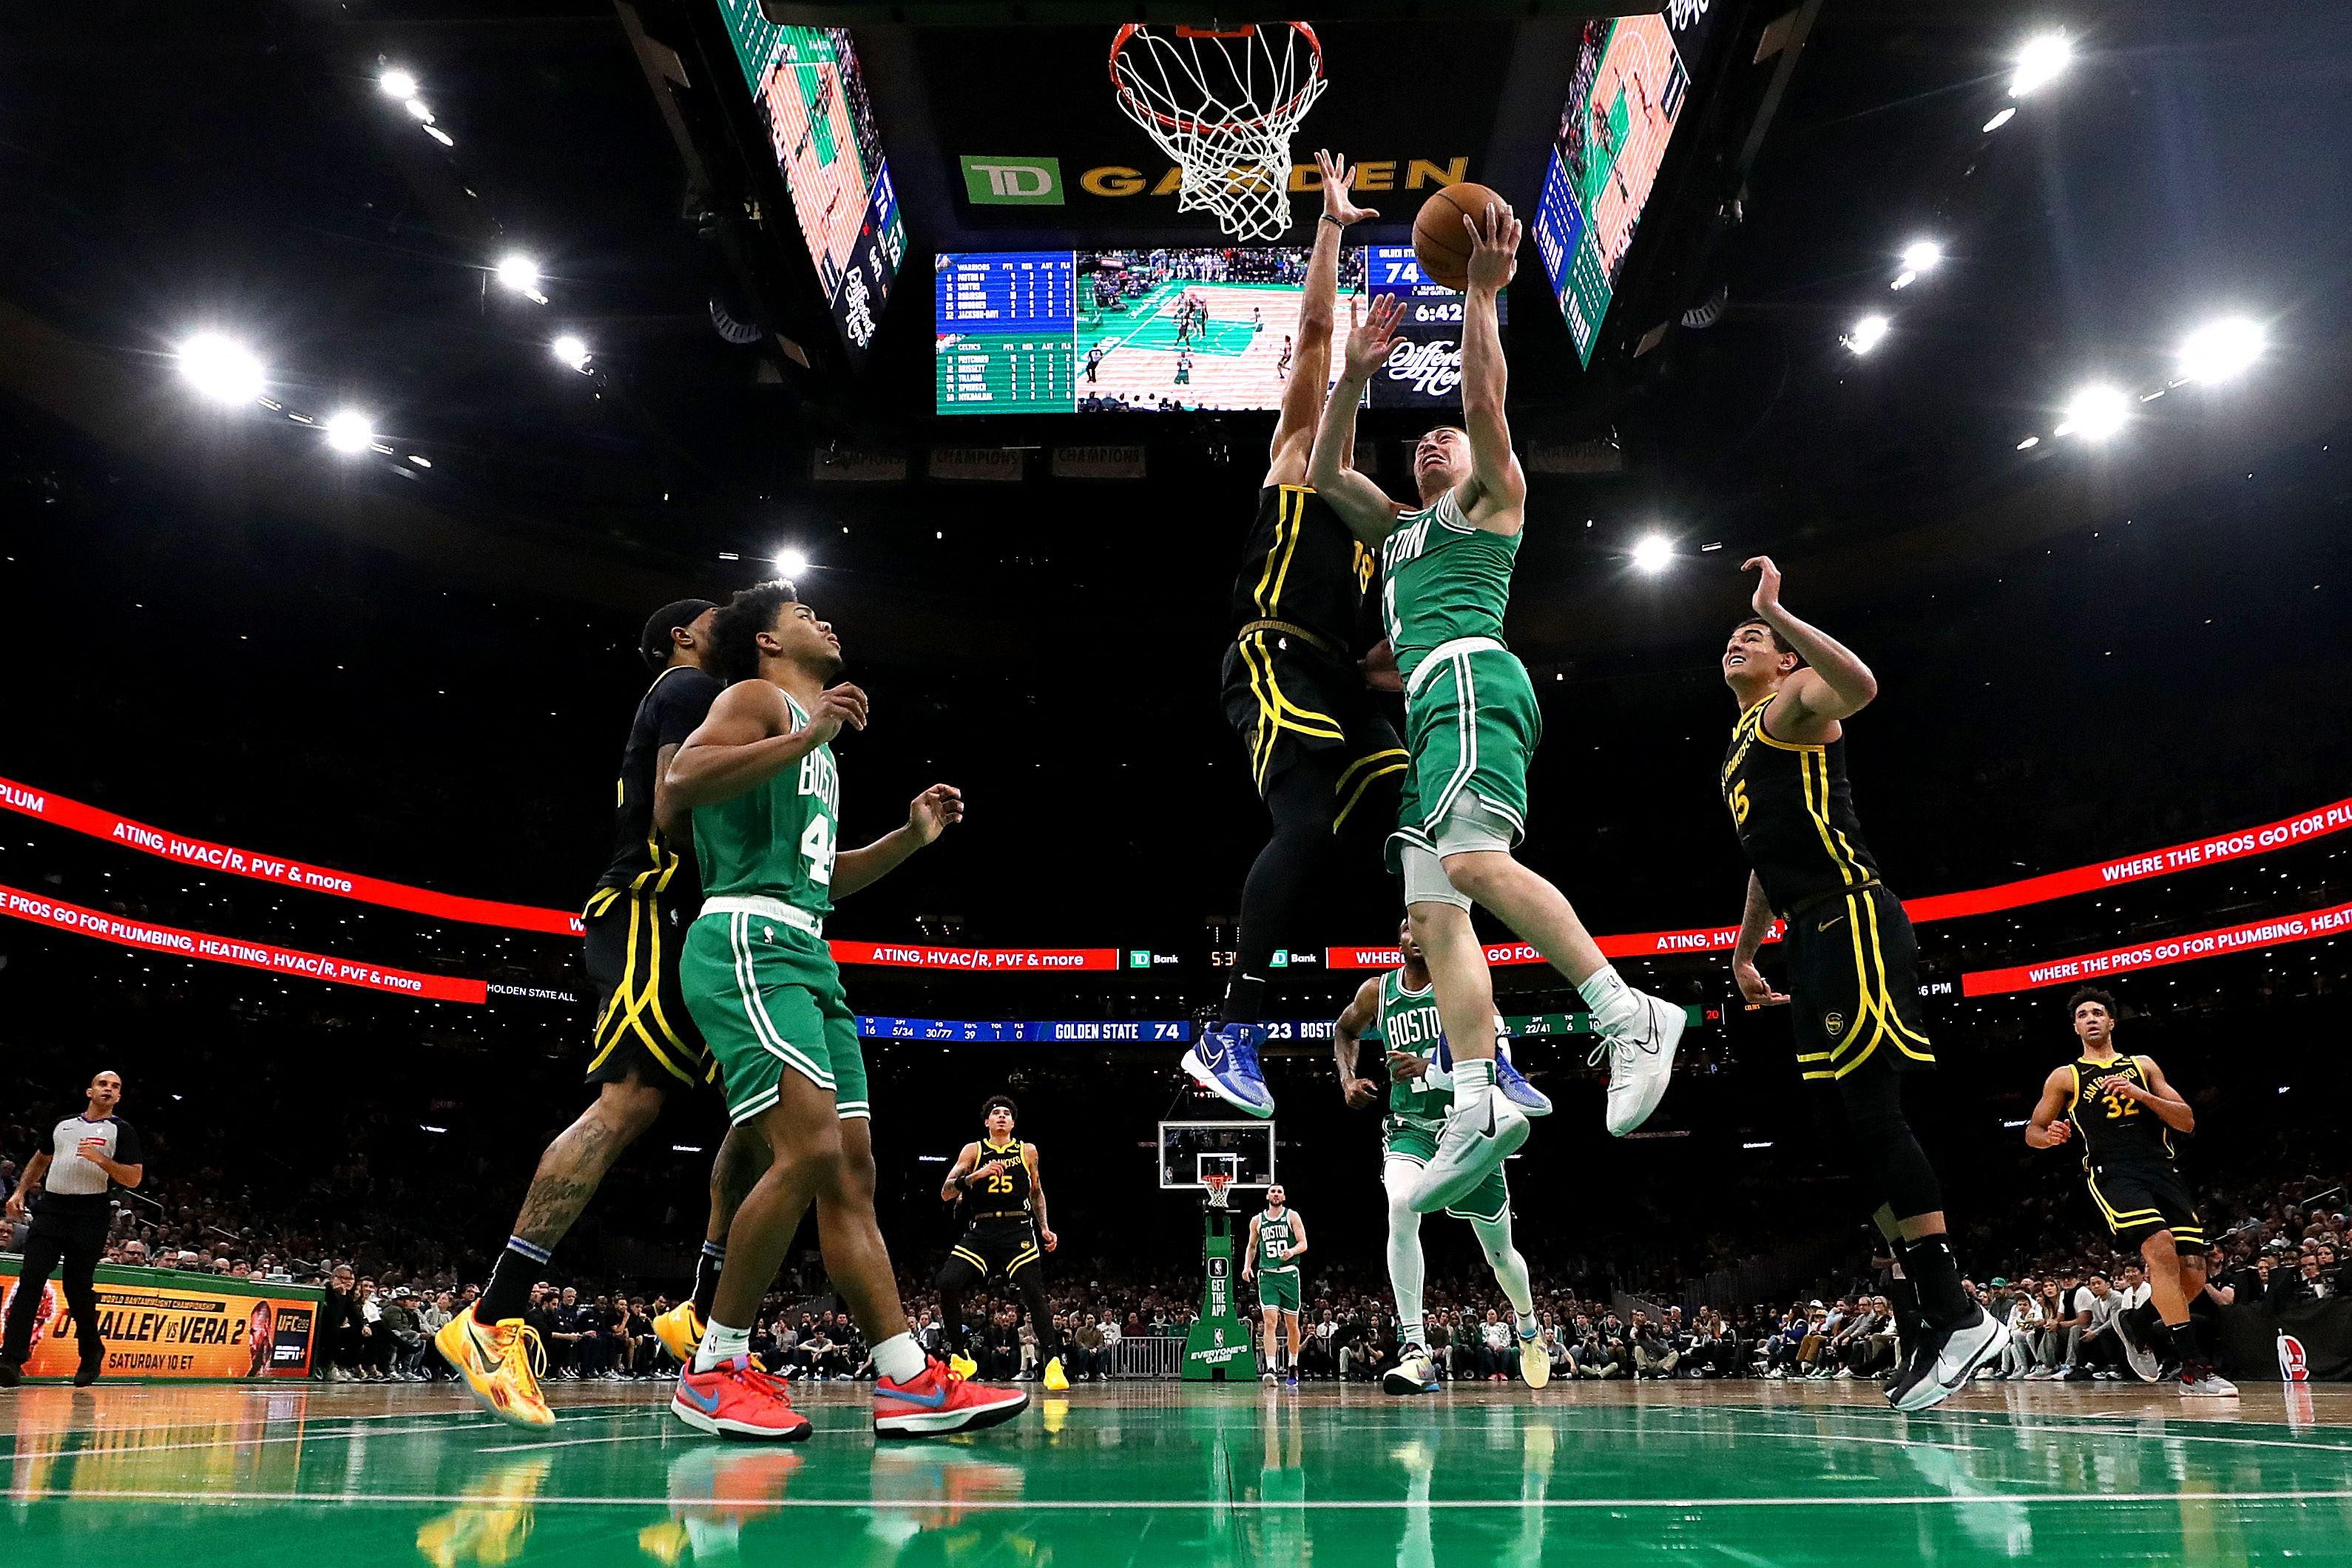 Boston Celtics lead by as many as 56 points, crush Golden State Warriors 140-88